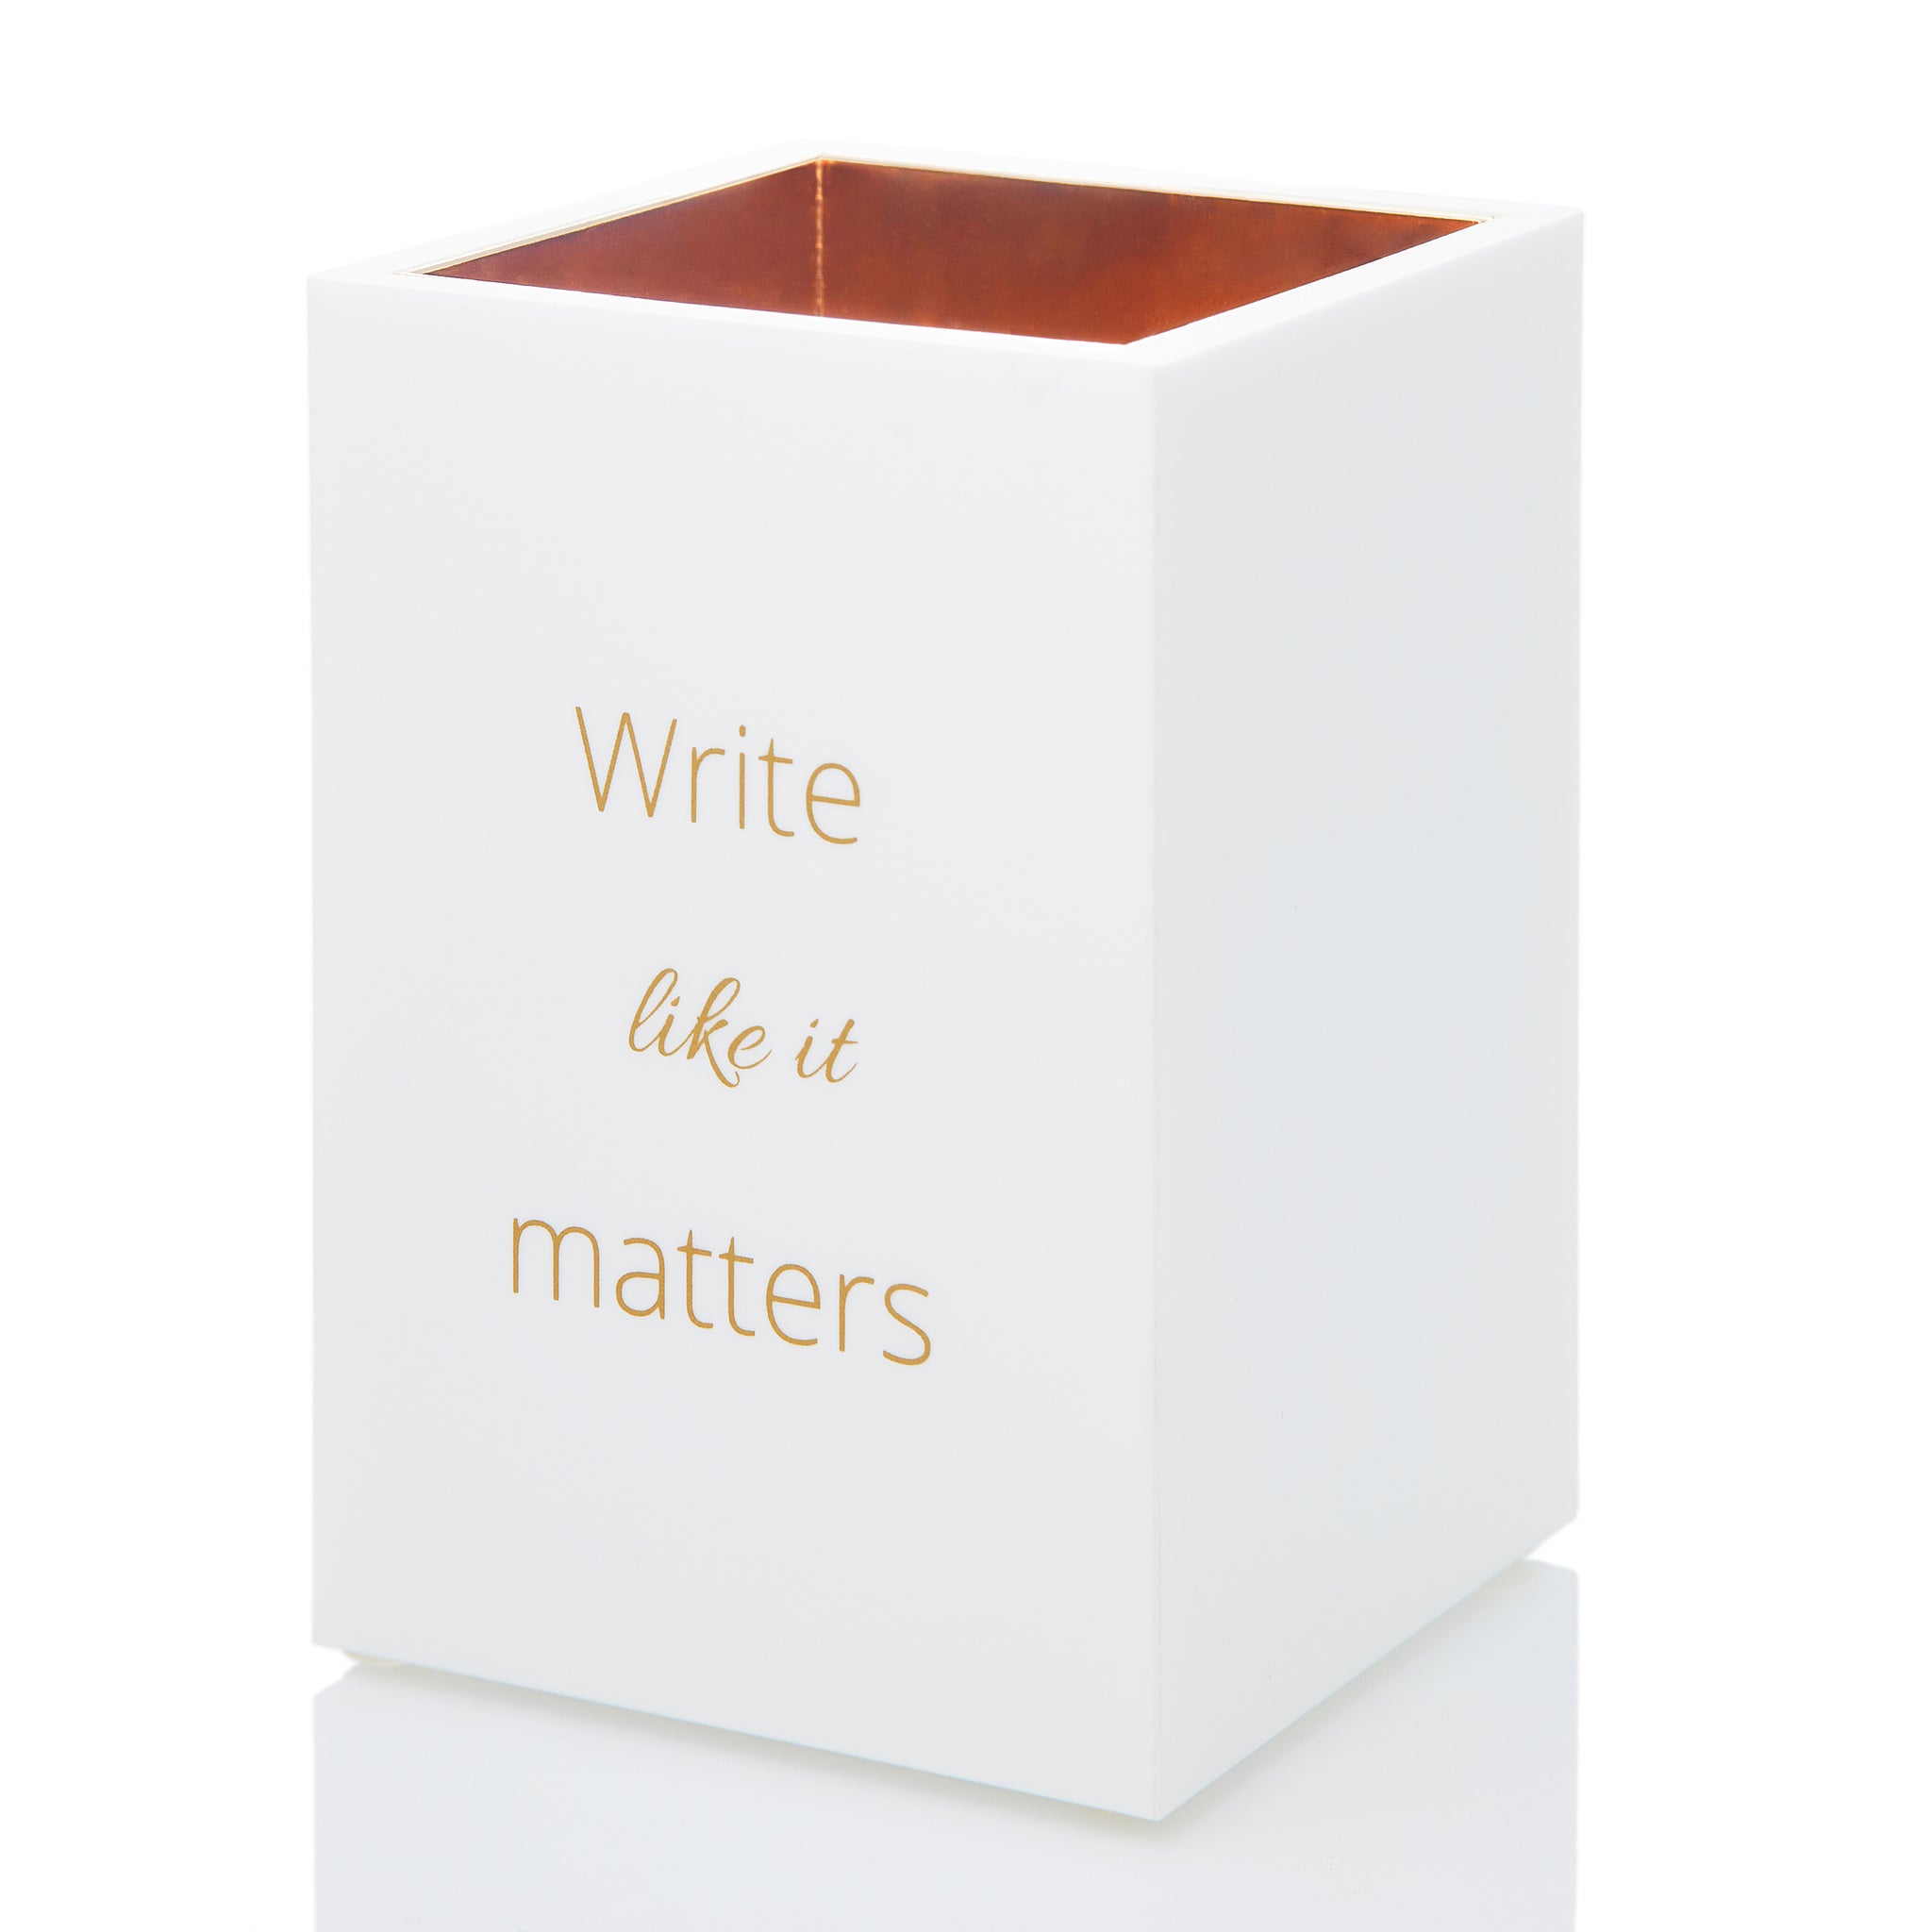 Write like it matters acrylic pen holder - Stitches and Tweed 